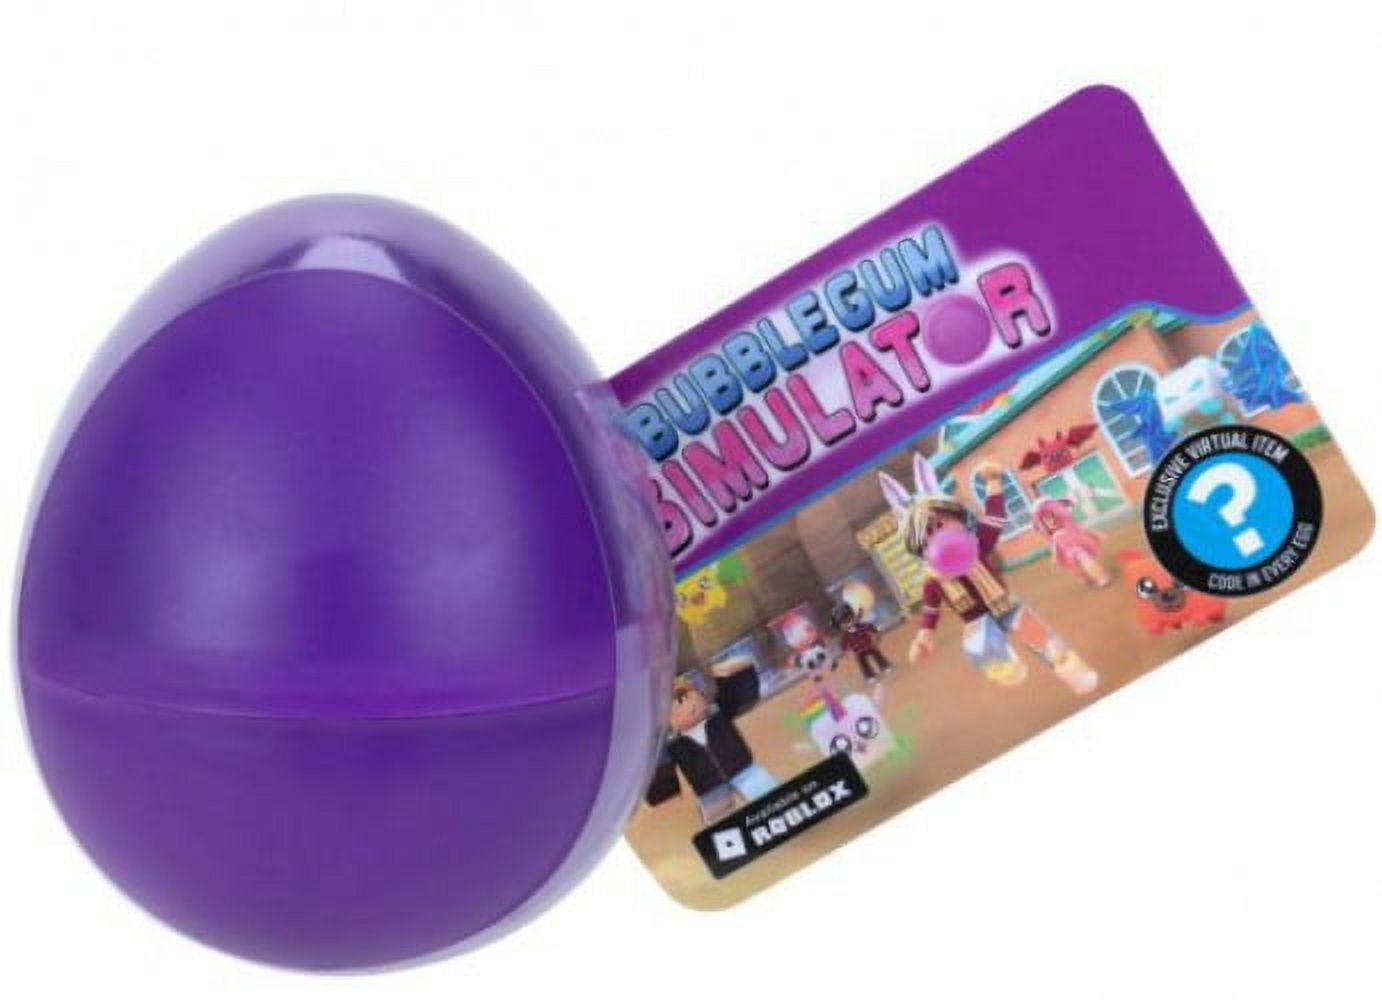 Roblox Action Collection - Micro Plush Series 1 Bubble Gum Simulator  Mystery Pack [Includes Exclusive Virtual Item]